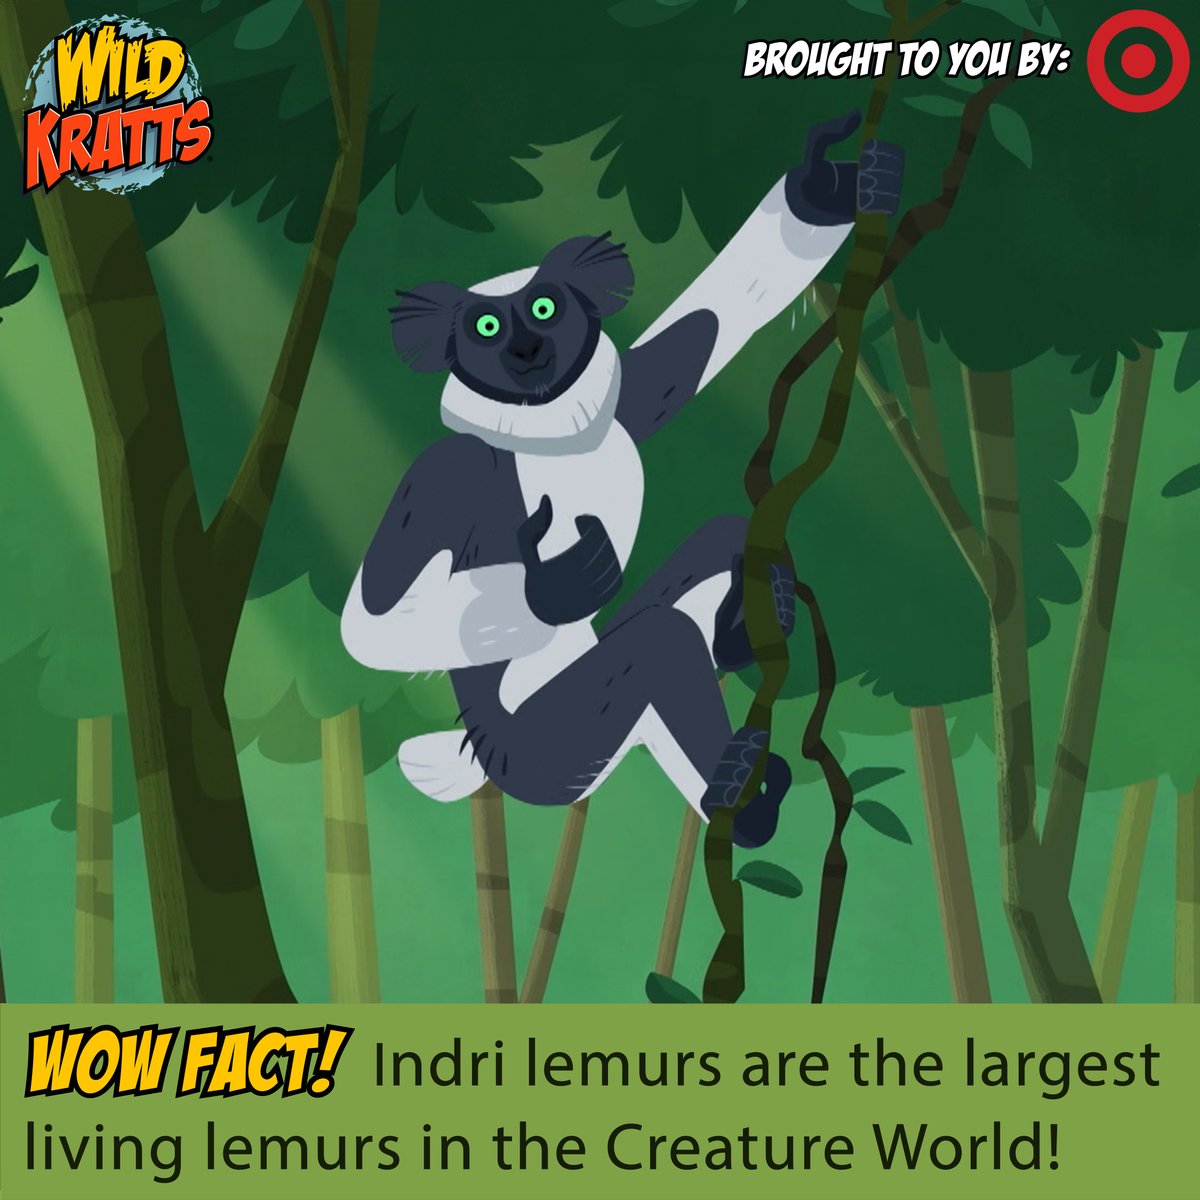 The indri: the world's largest living lemur! Indri are not only the largest living lemur, weighing between 13-21lbs and measuring 25-28 inches in length, but they also have one of the longest thumb toes in in the entire Creature World! Their giant hand-like feet with those long